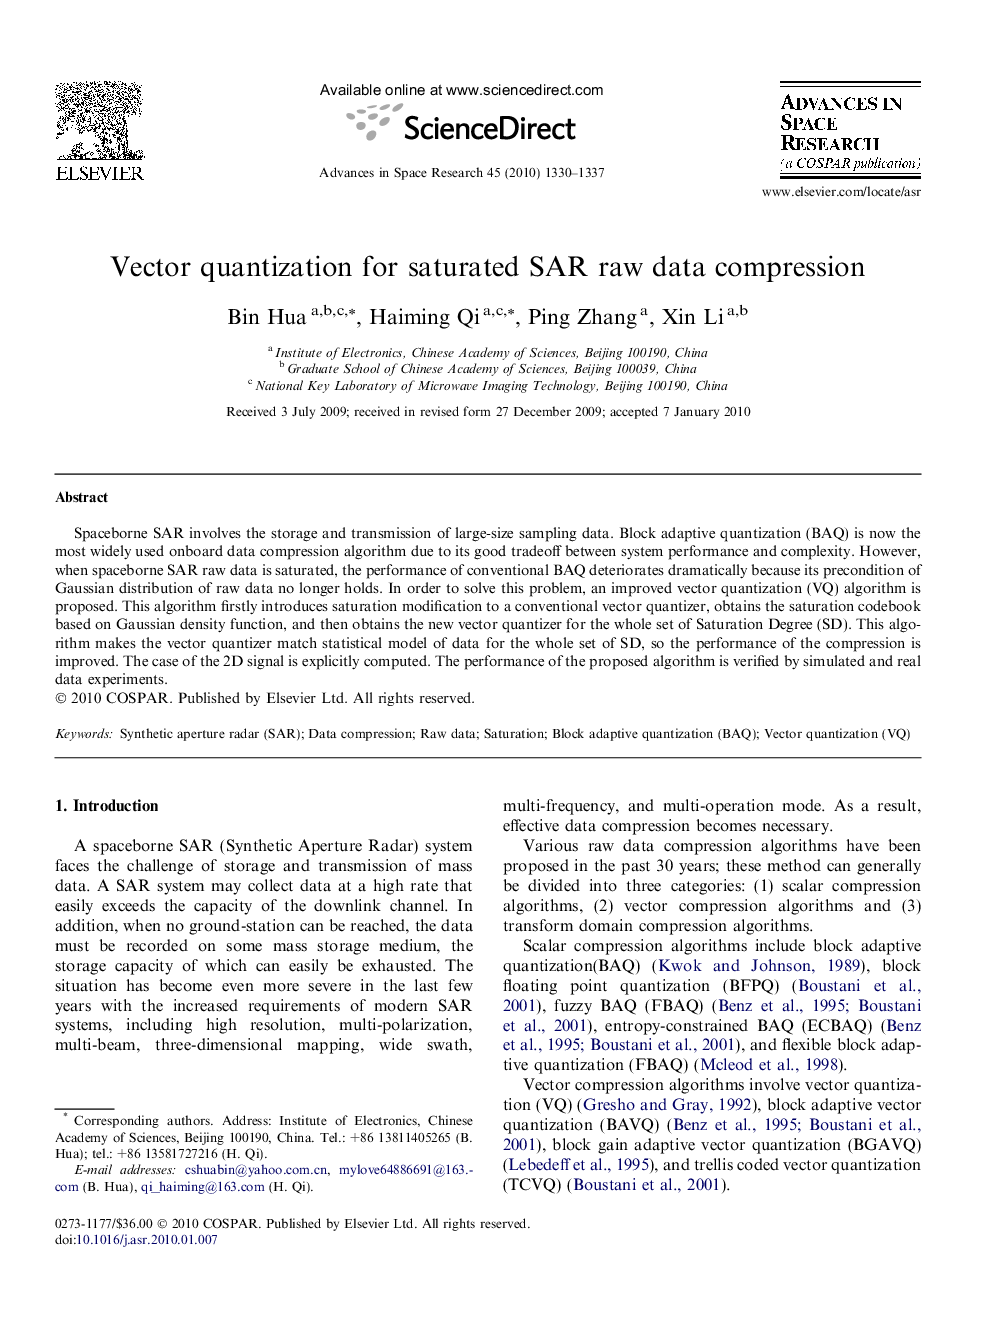 Vector quantization for saturated SAR raw data compression